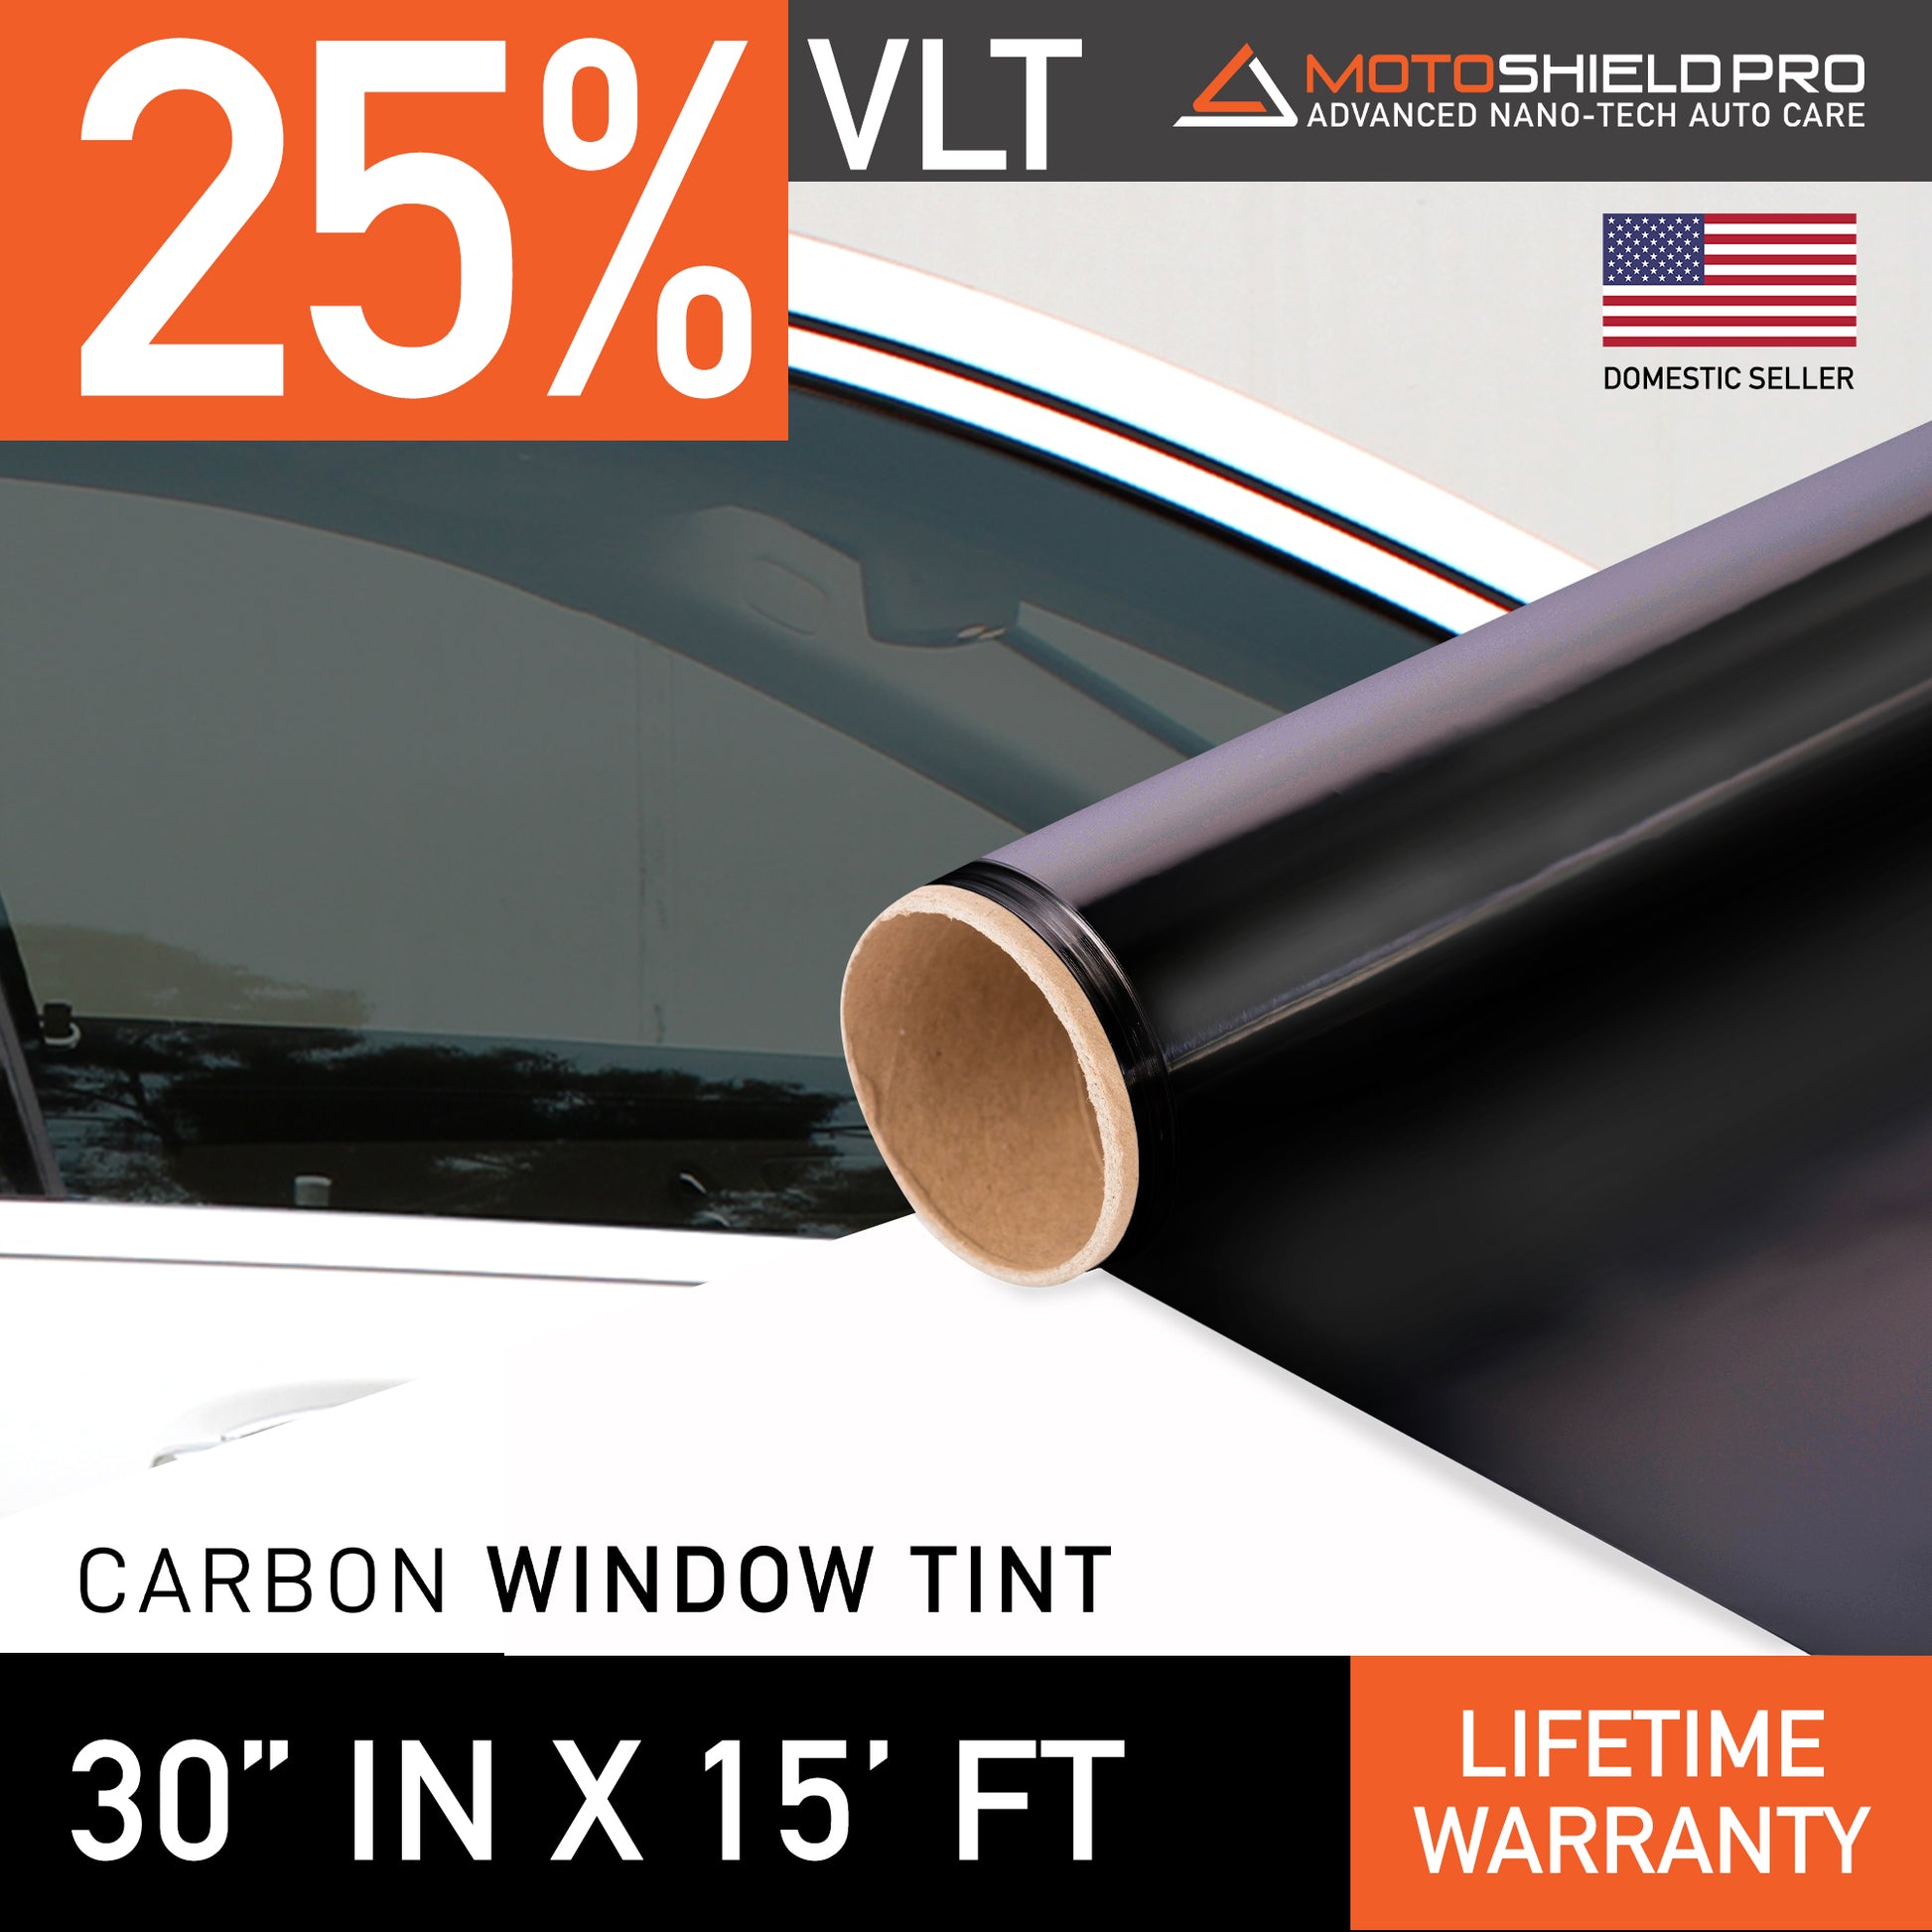 MotoShield Pro Carbon Window Tint Film rejects 99% of ultraviolet radiation rays. It is a a great choice for vehicle owners looking to get UV protection and improve the appearance of their vehicle.